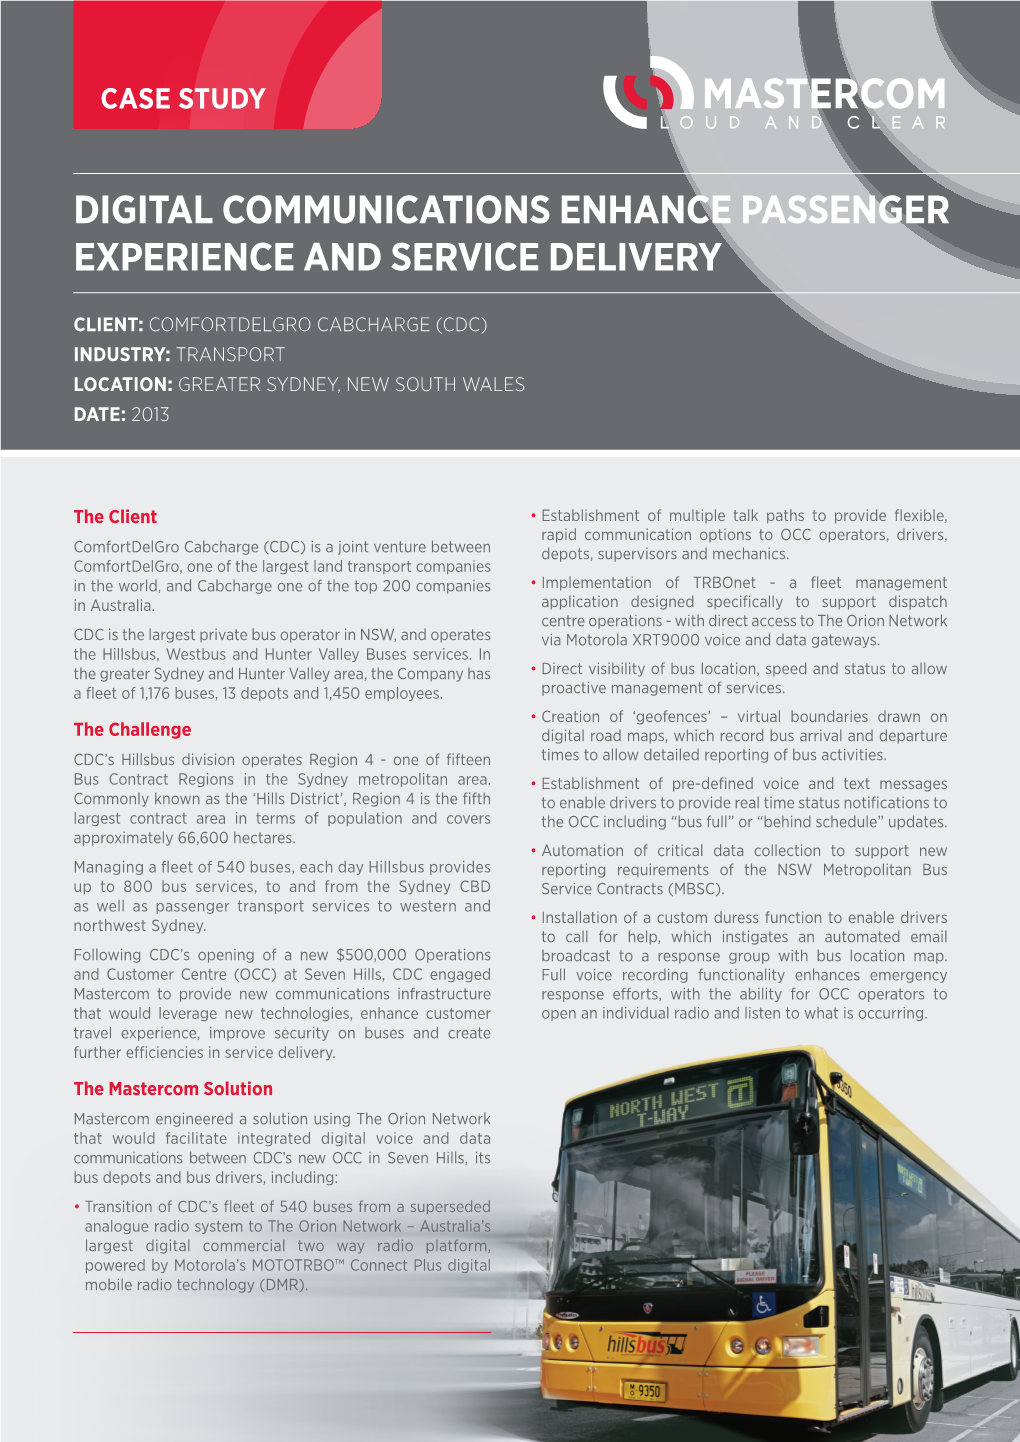 Digital Communications Enhance Passenger Experience and Service Delivery